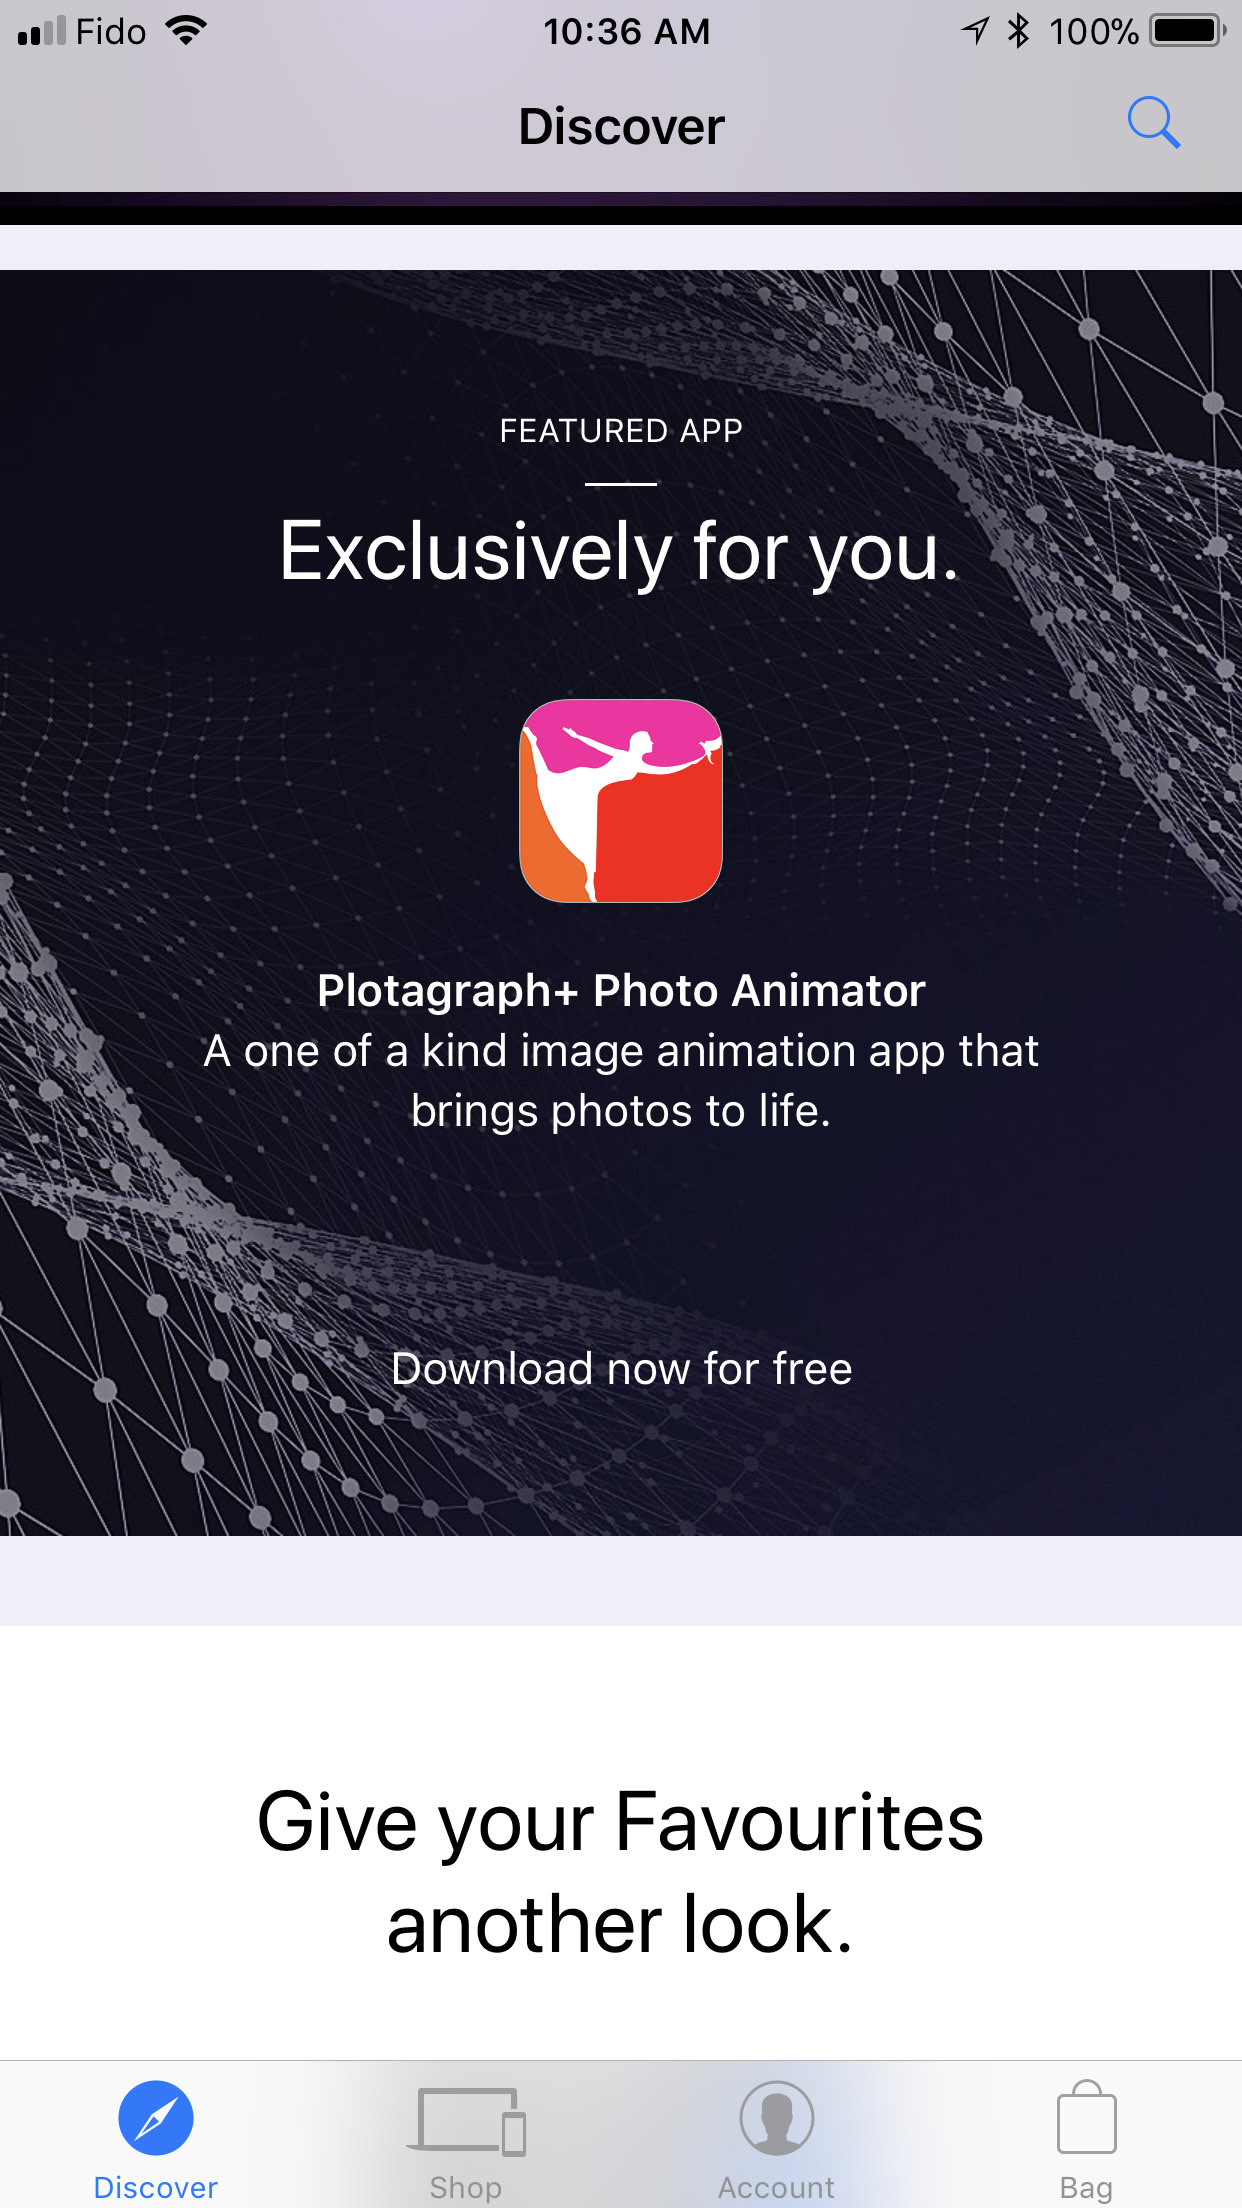 Apple Offers &#039;Plotagraph+ Photo Animator&#039; as a Free Download